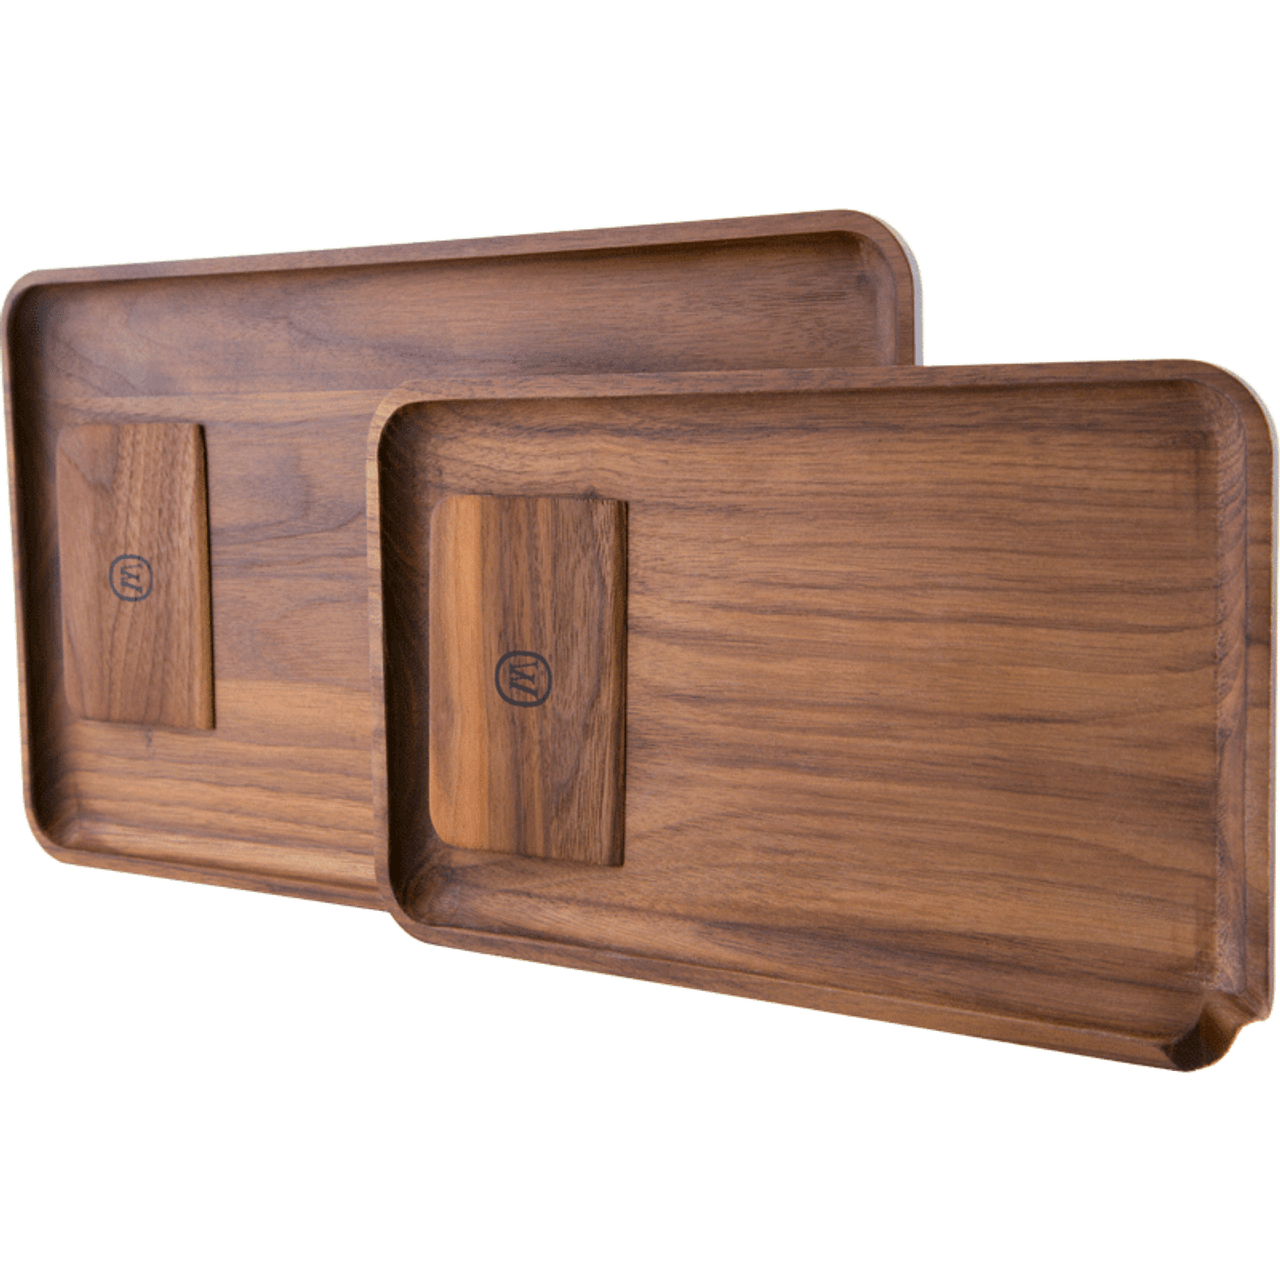 Wooden Rolling Tray by Marley Natural Marley Natural